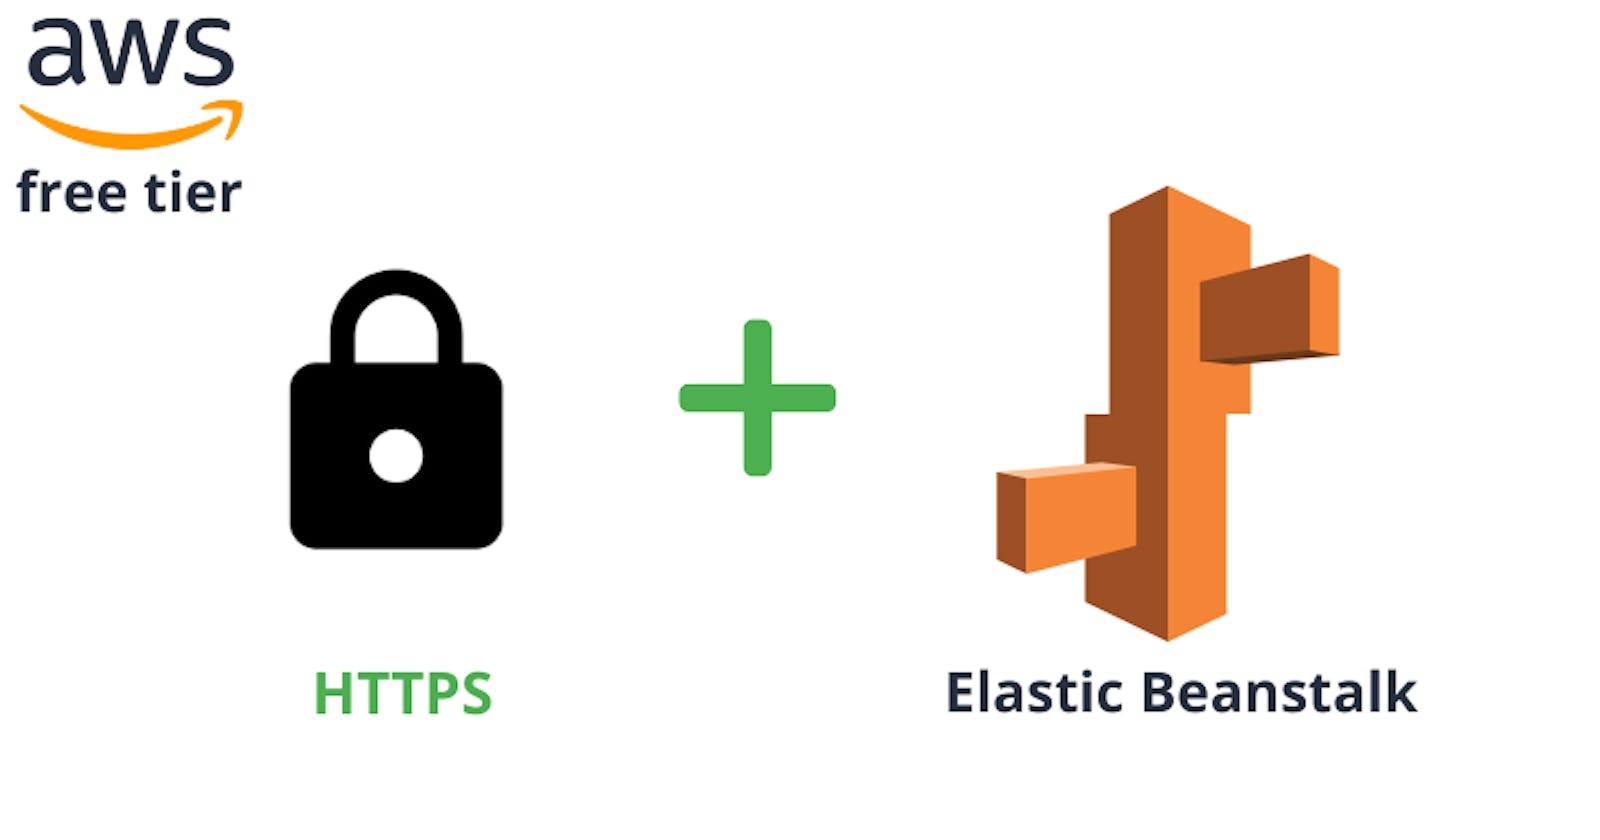 How to setup a https server in Elastic Beanstalk (The Cheap Way)?